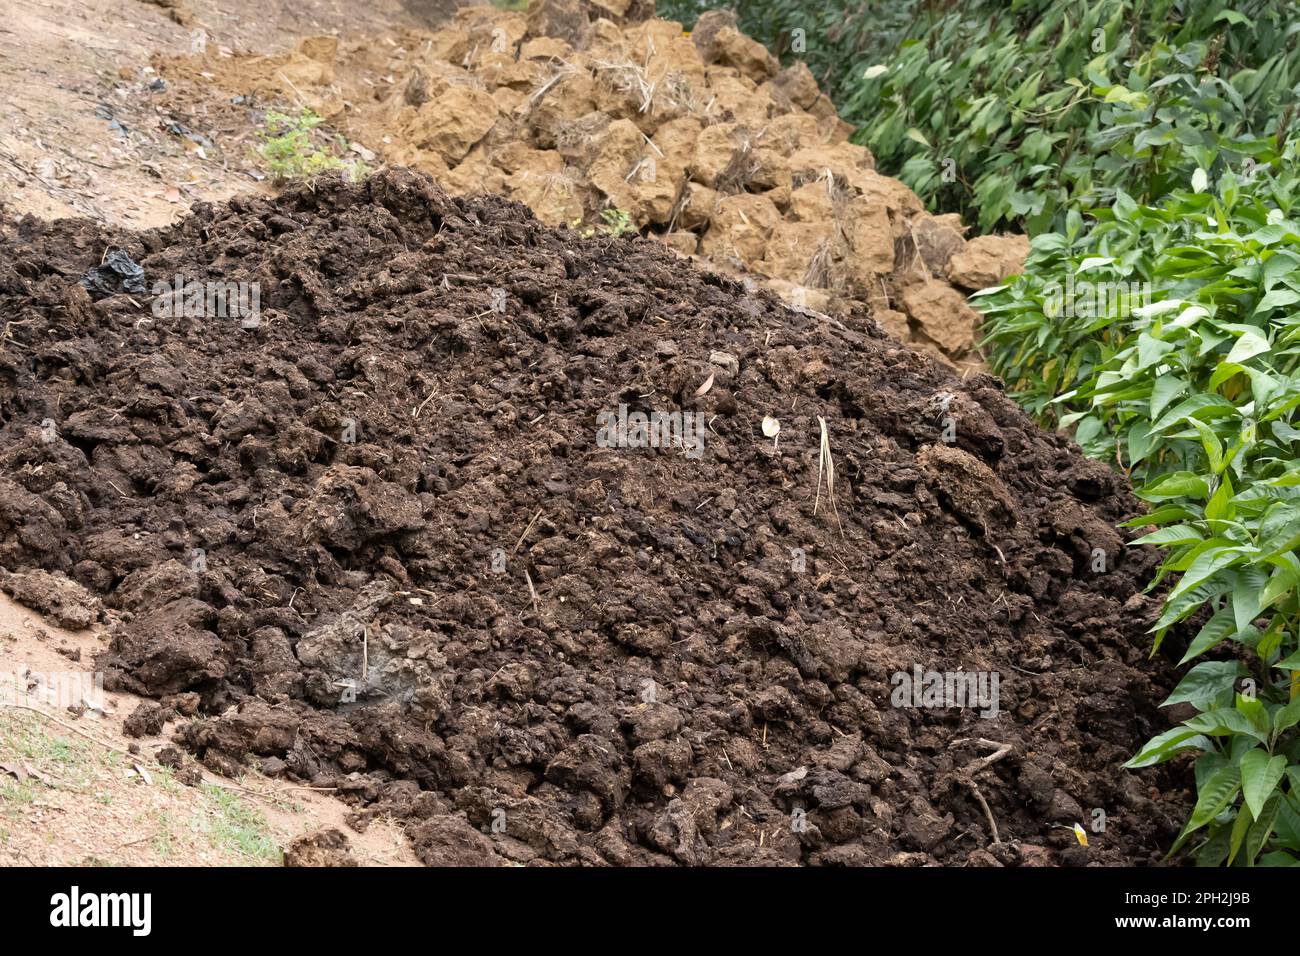 Vermicompost (vermicompost) is the product of the decomposition process using various species of worms, usually red wigglers, white worms, and other Stock Photo